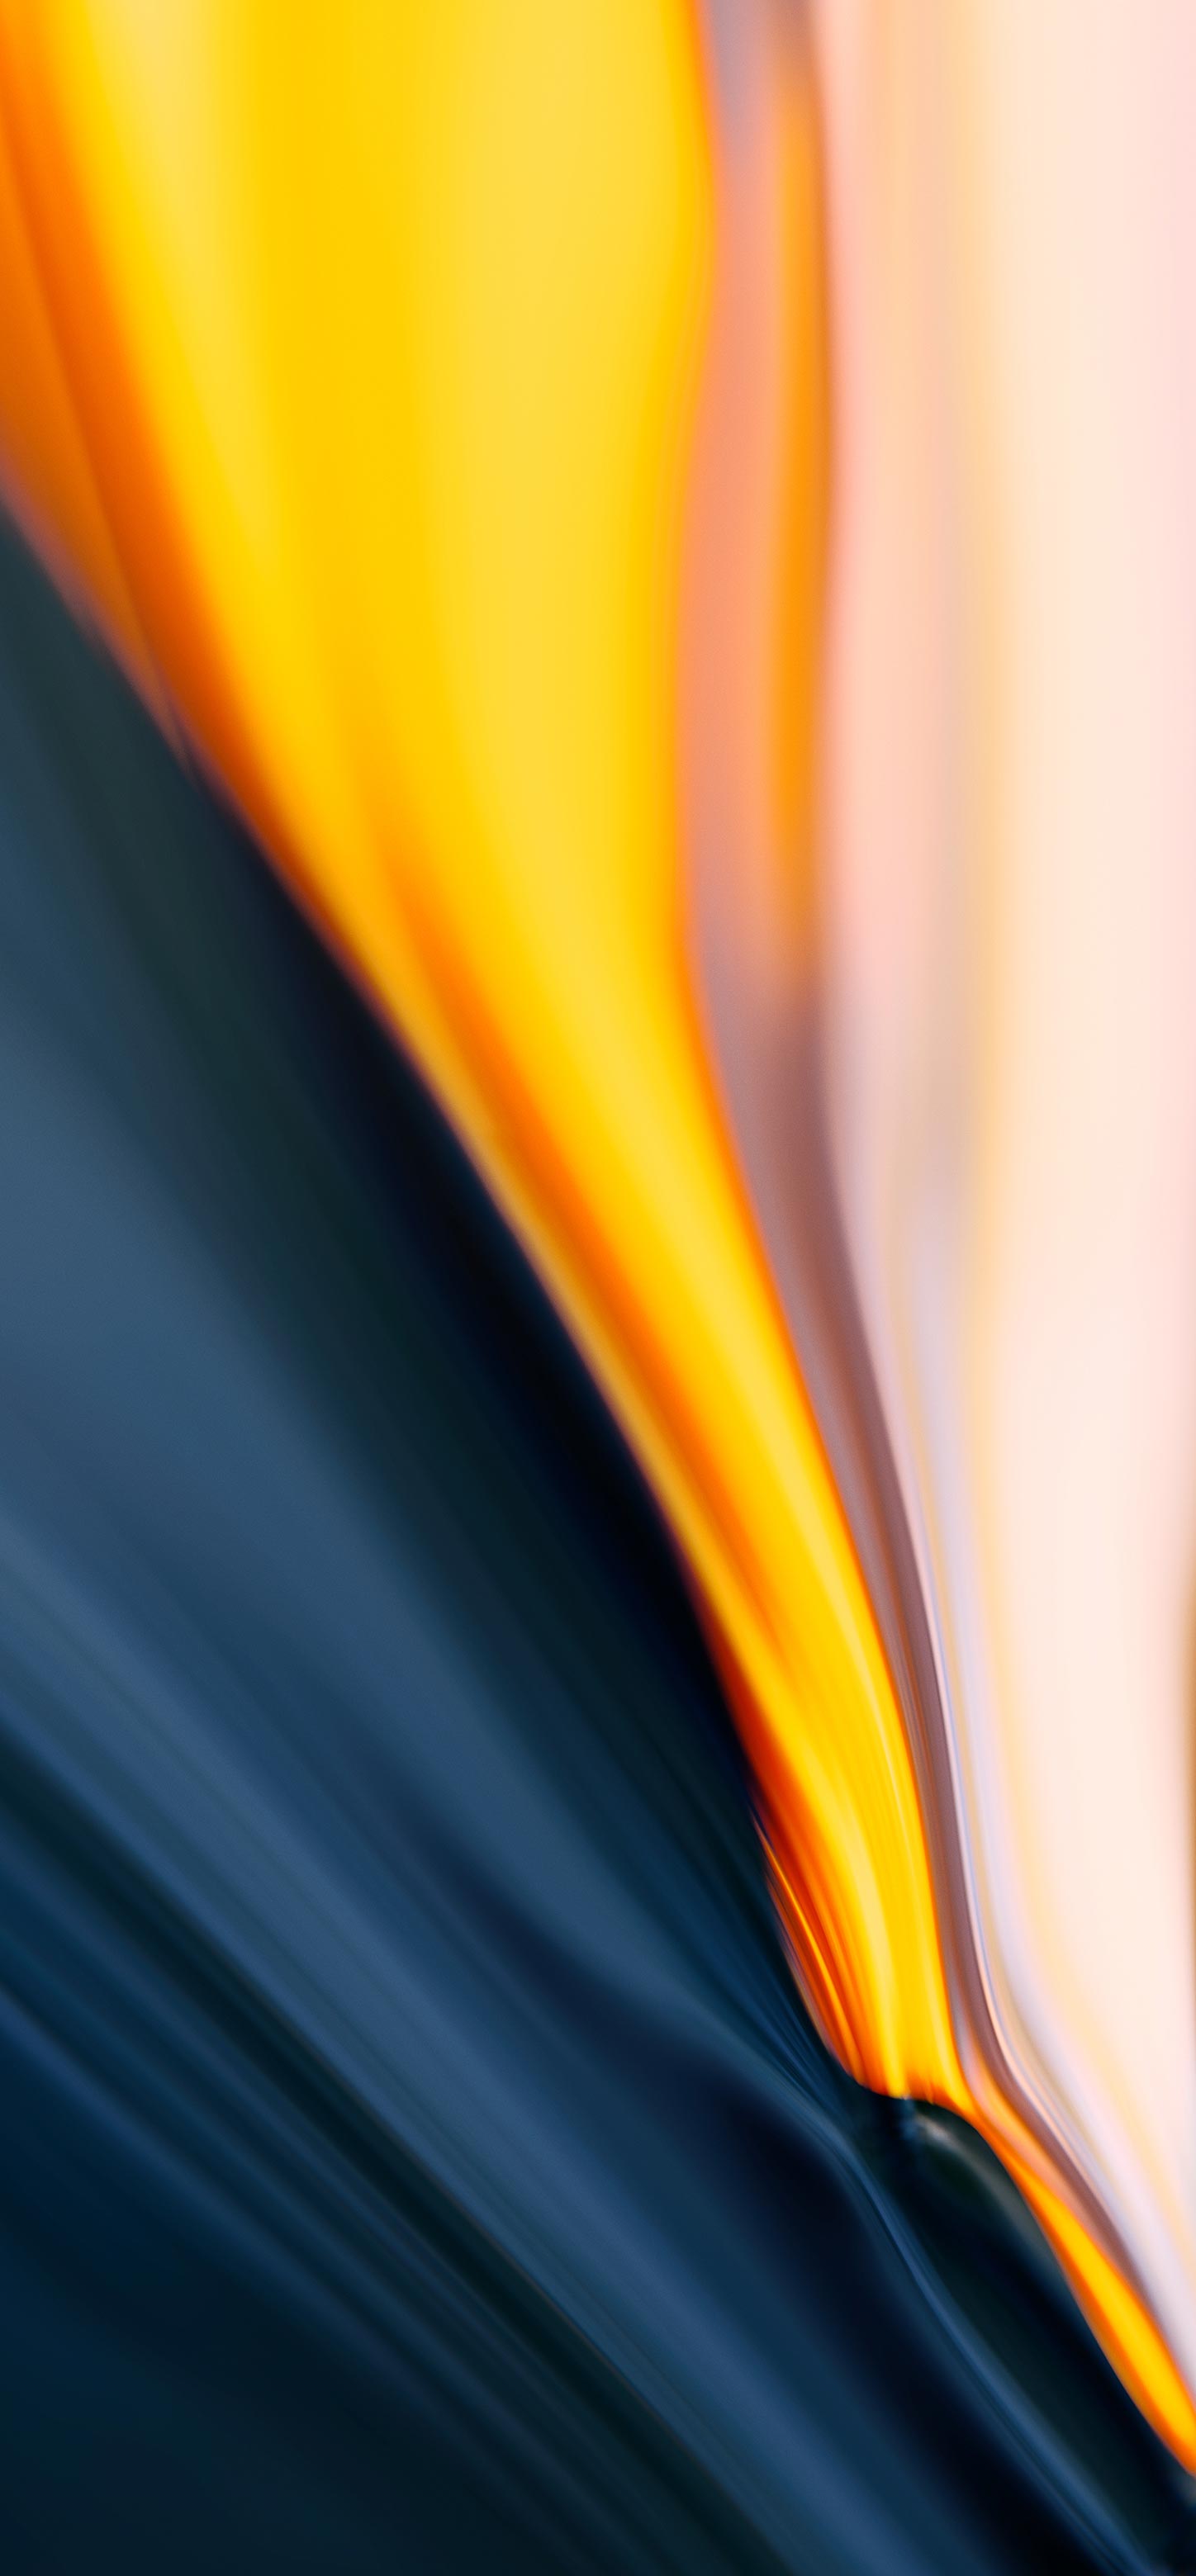 oneplus 7 pro stock wallpapers in 4k